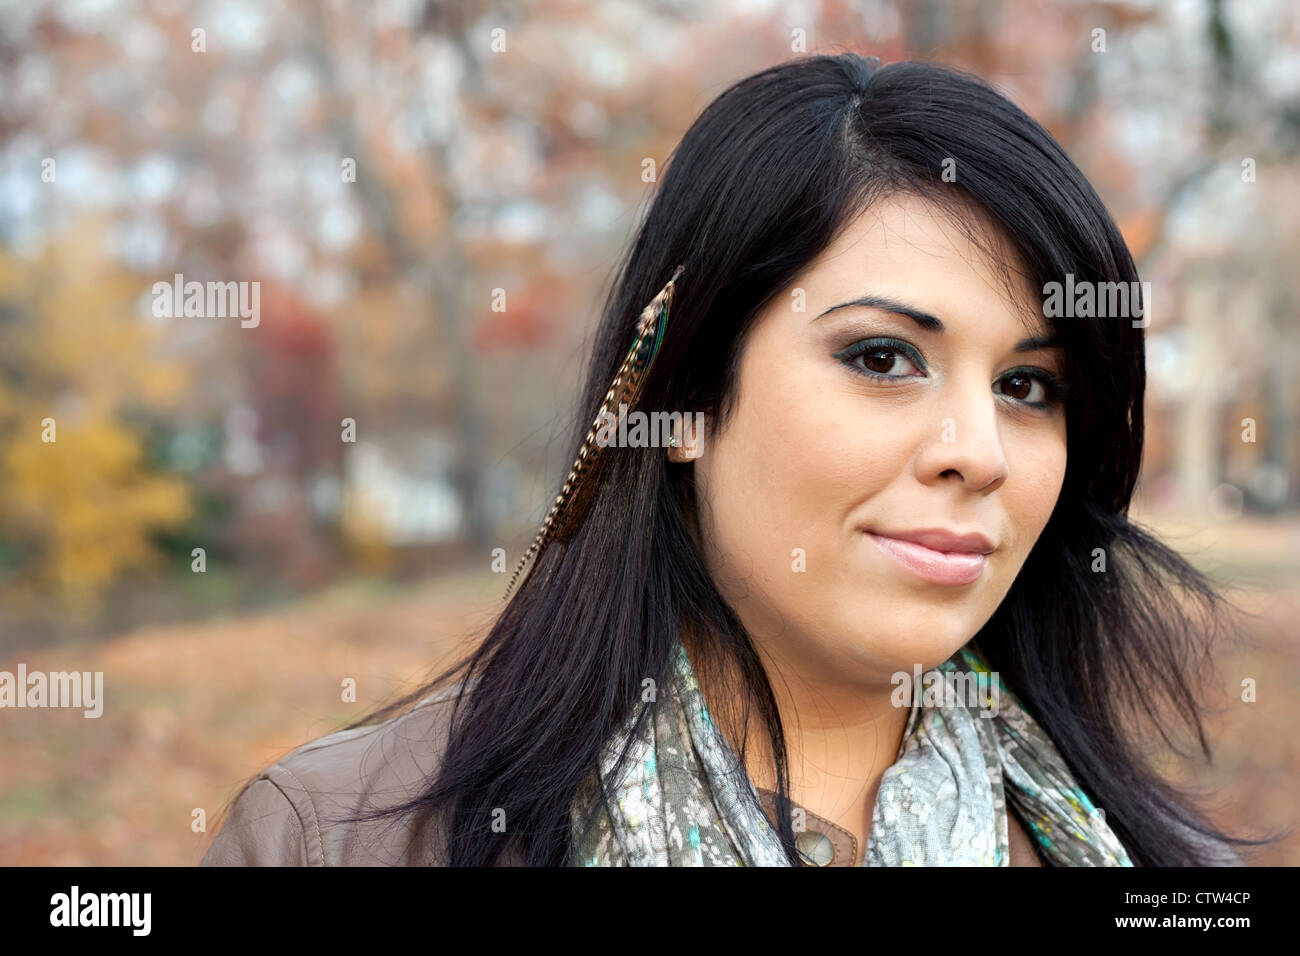 Beautiful young Hispanic woman wearing custom feather hair extensions in her black hair. Stock Photo